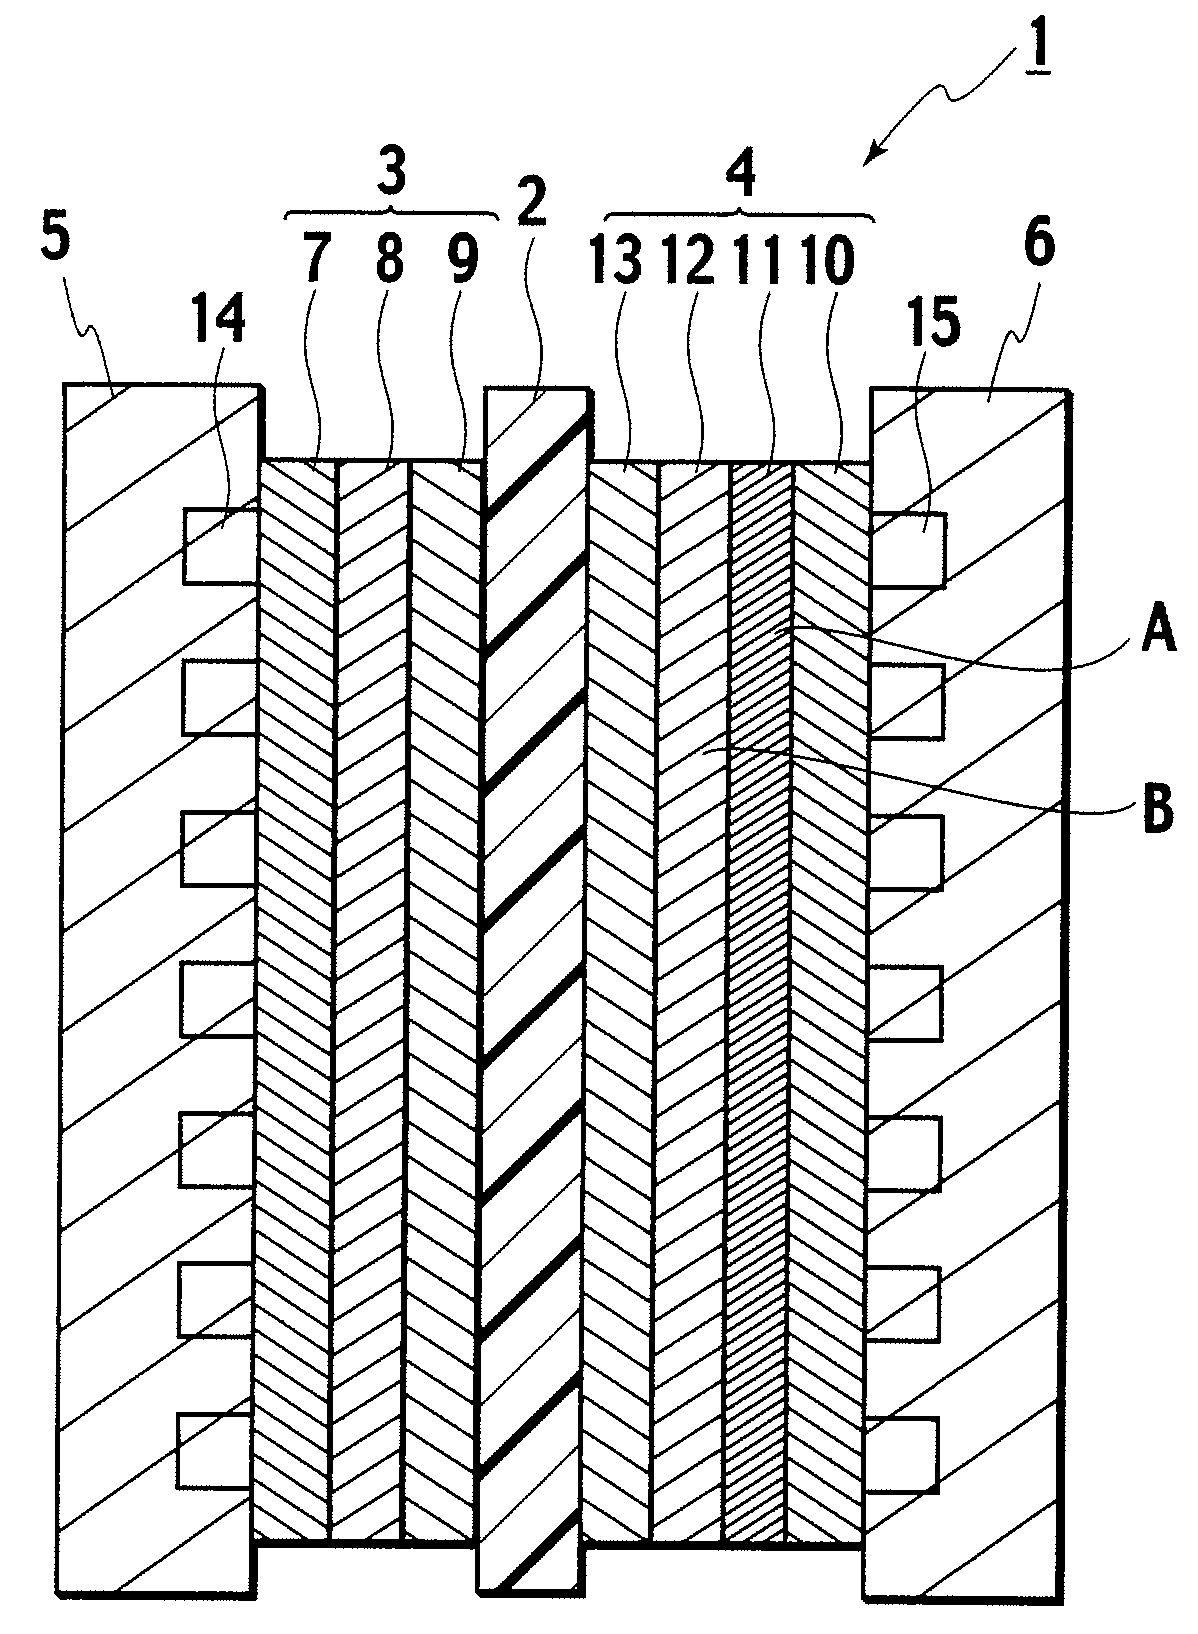 Gas Diffusion Electrode and Solid Polymer Electrolyte Fuel Cell